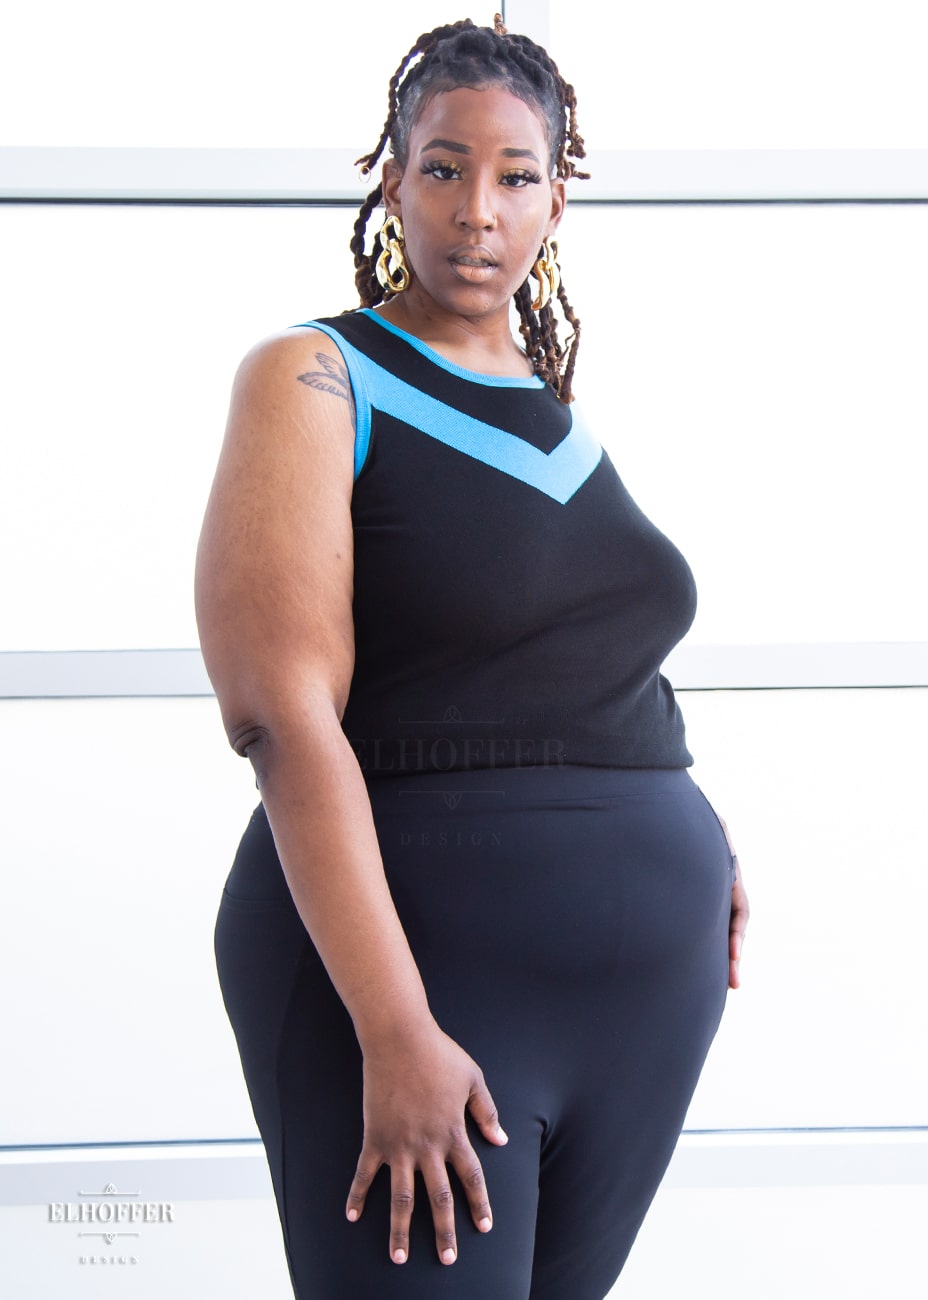 Myjah, a medium dark skinned 3xl model with shoulder length braids, is wearing a light weight sleeveless knit top.  The body of the top is mainly black with a bright teal chevron design across the chest and matching teal binding around the neckline and armholes.